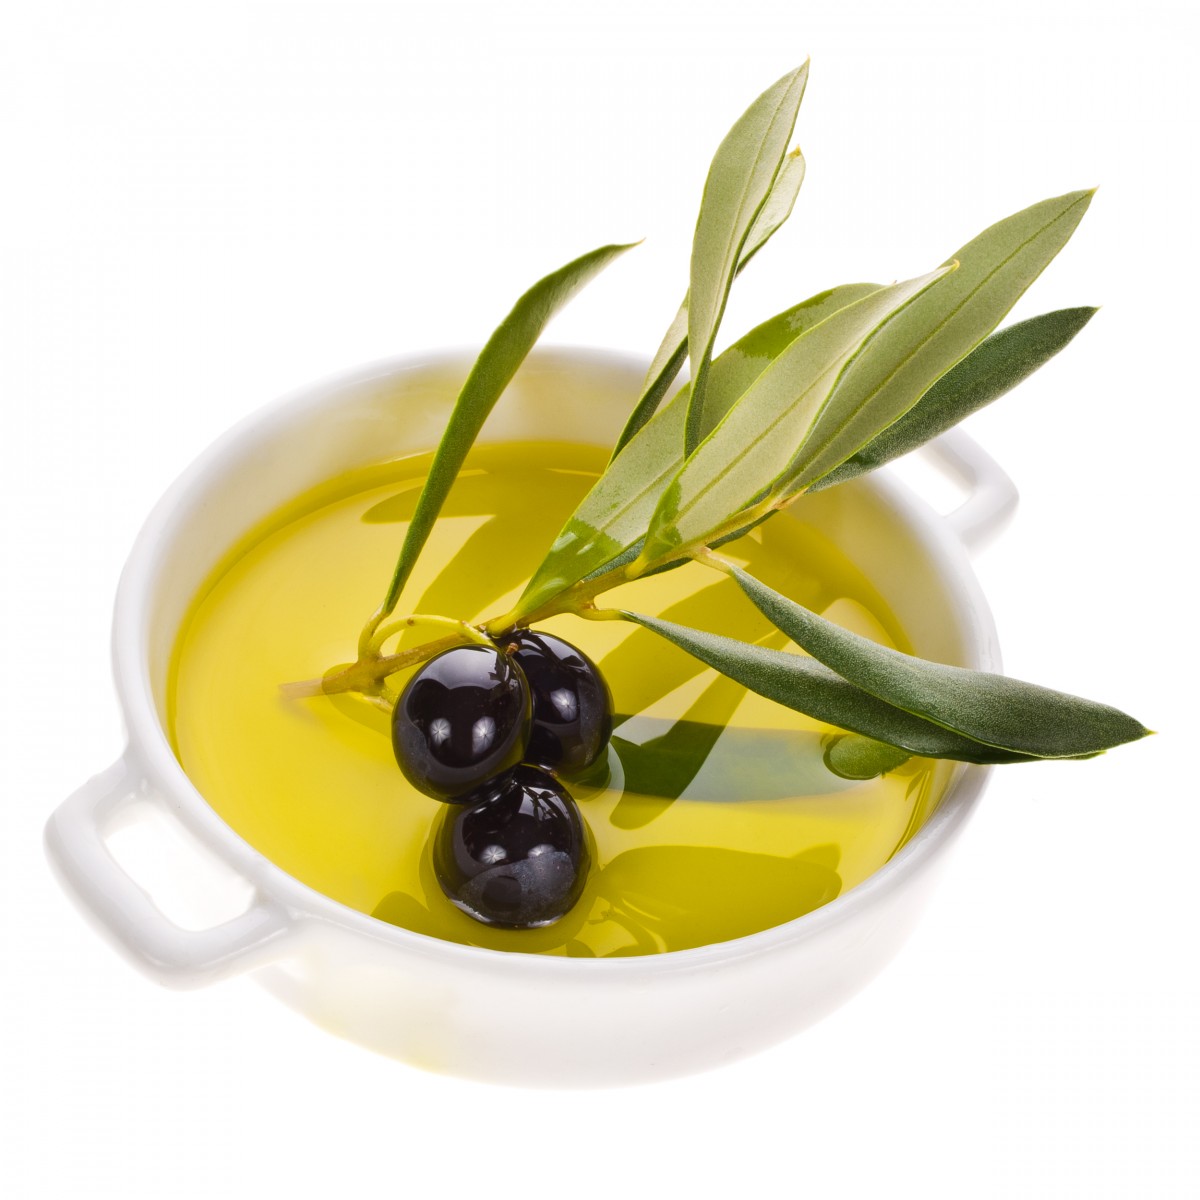 Oleocanthal in Olive Oil Pokes Holes in Cancer Cells